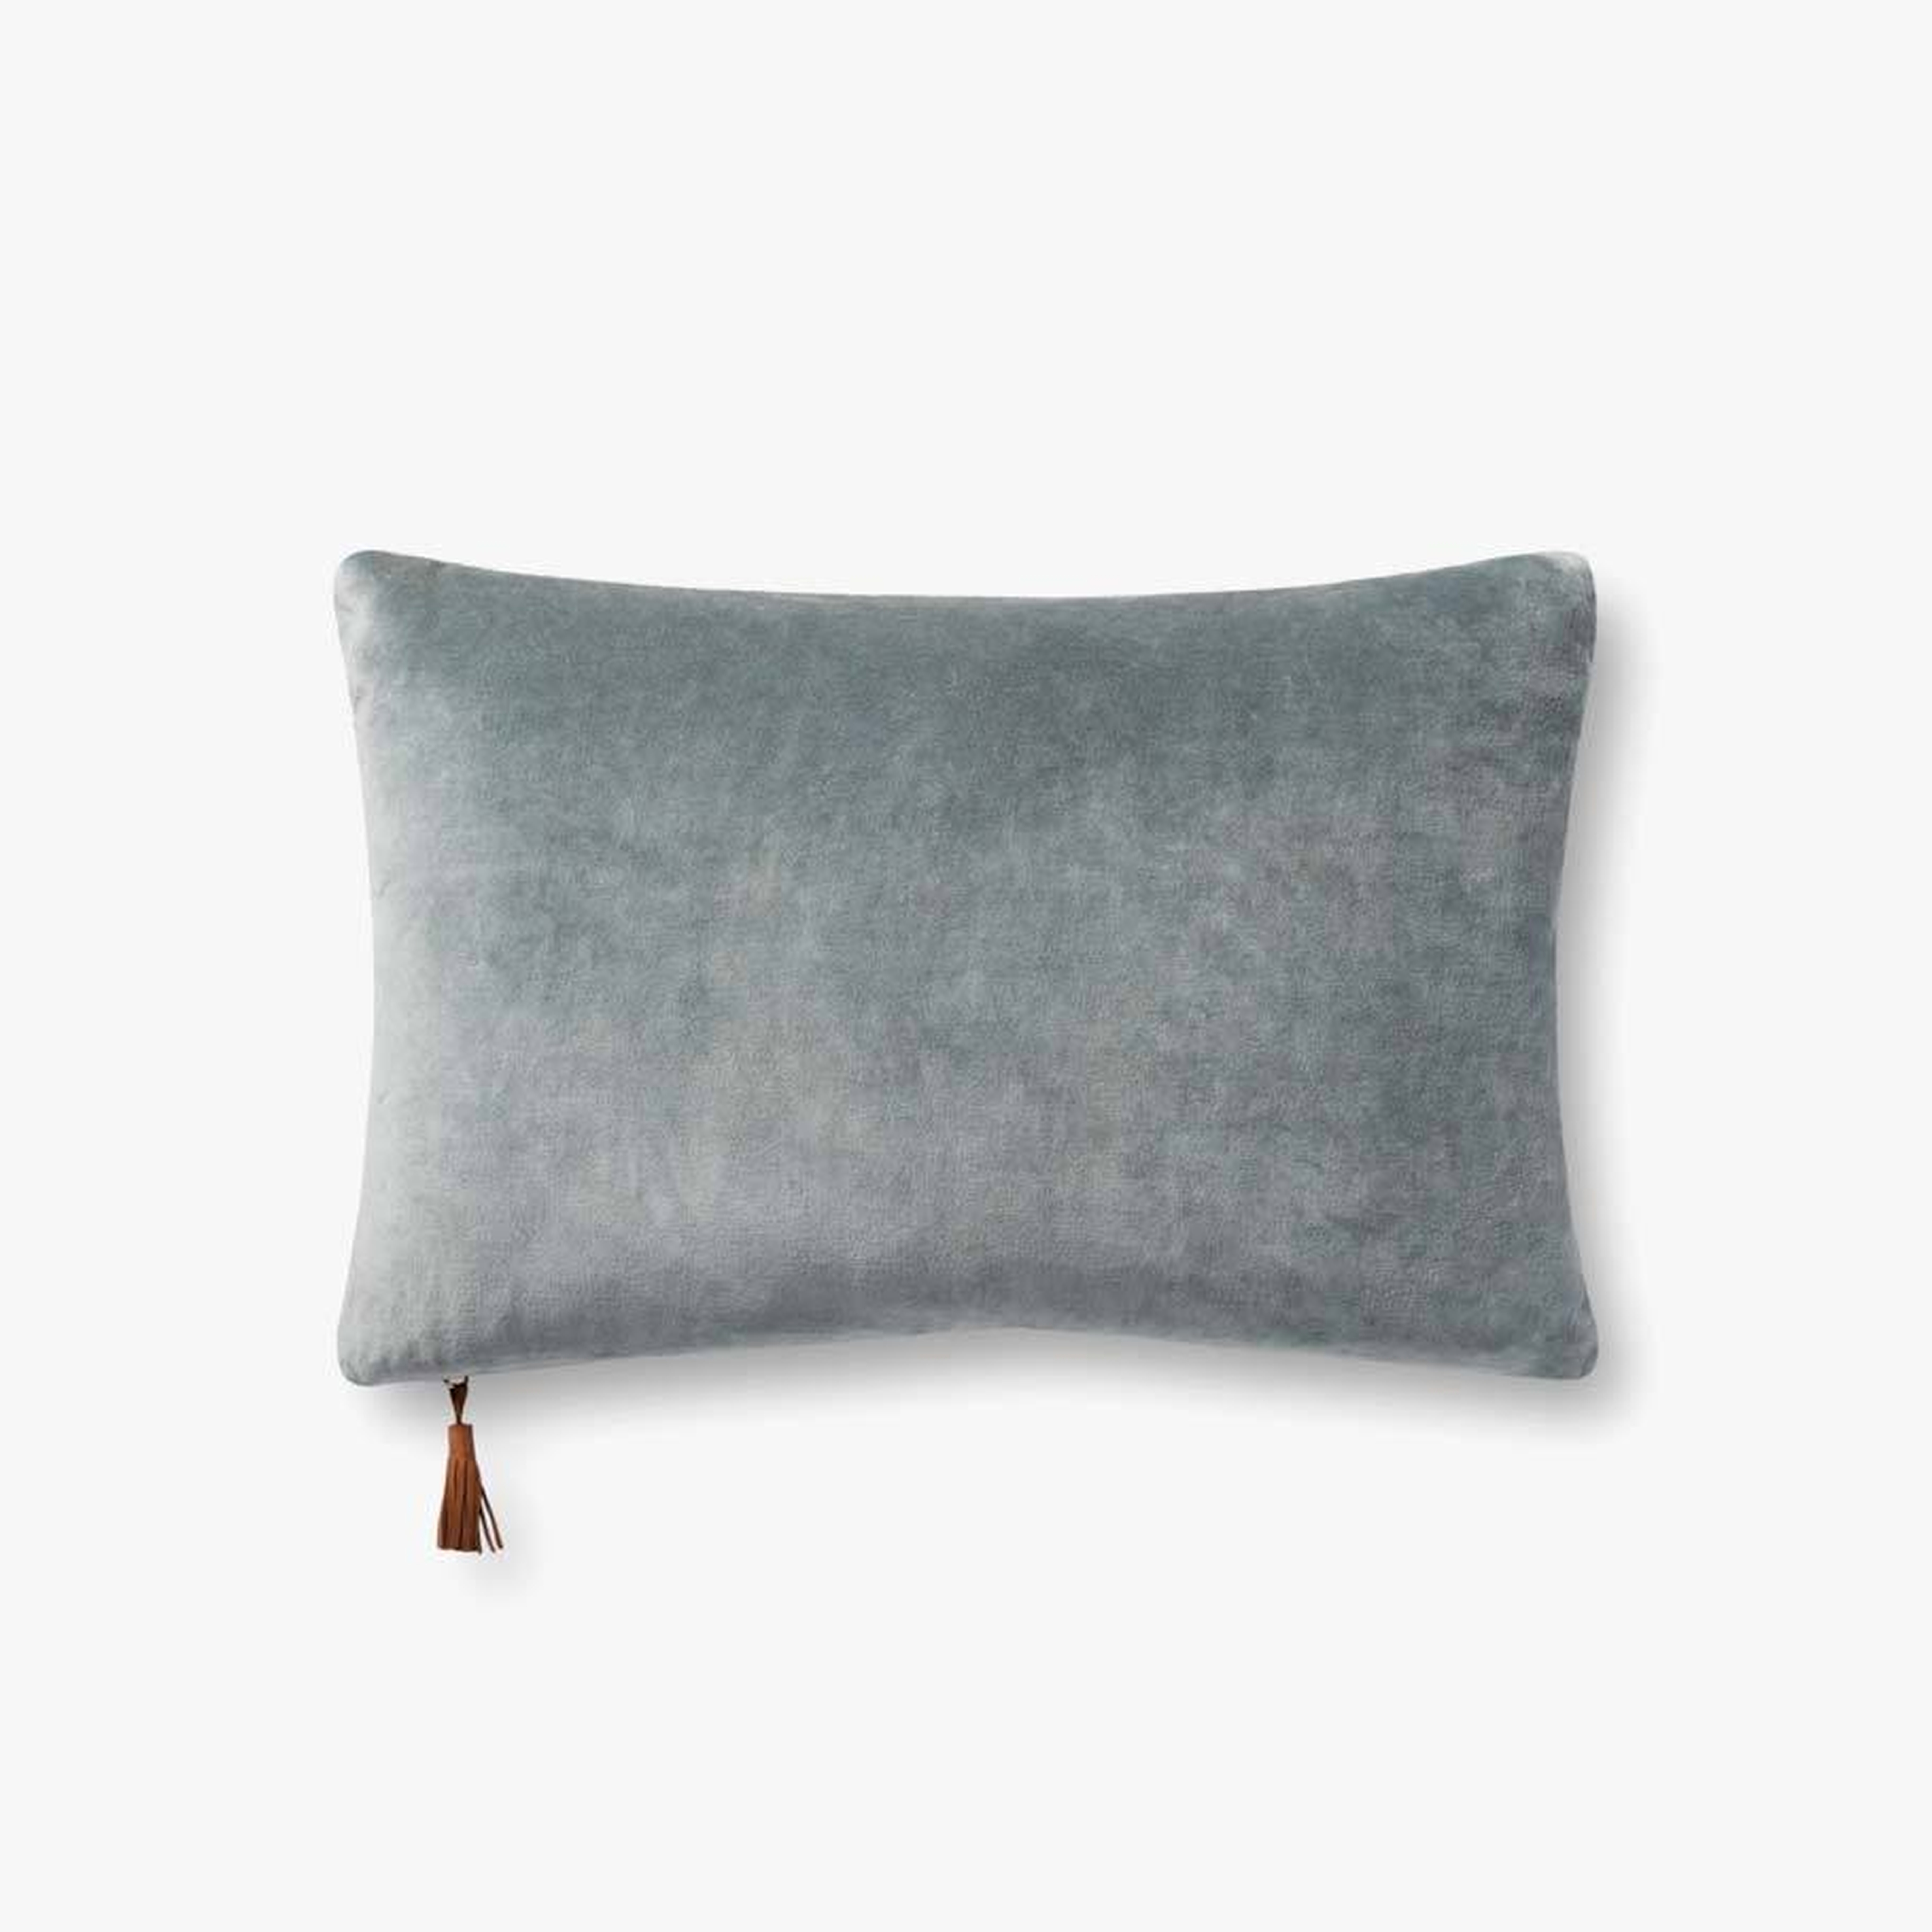 PILLOWS P1153 DENIM / TAN 13" x 21" Cover w/Down - Magnolia Home by Joana Gaines Crafted by Loloi Rugs